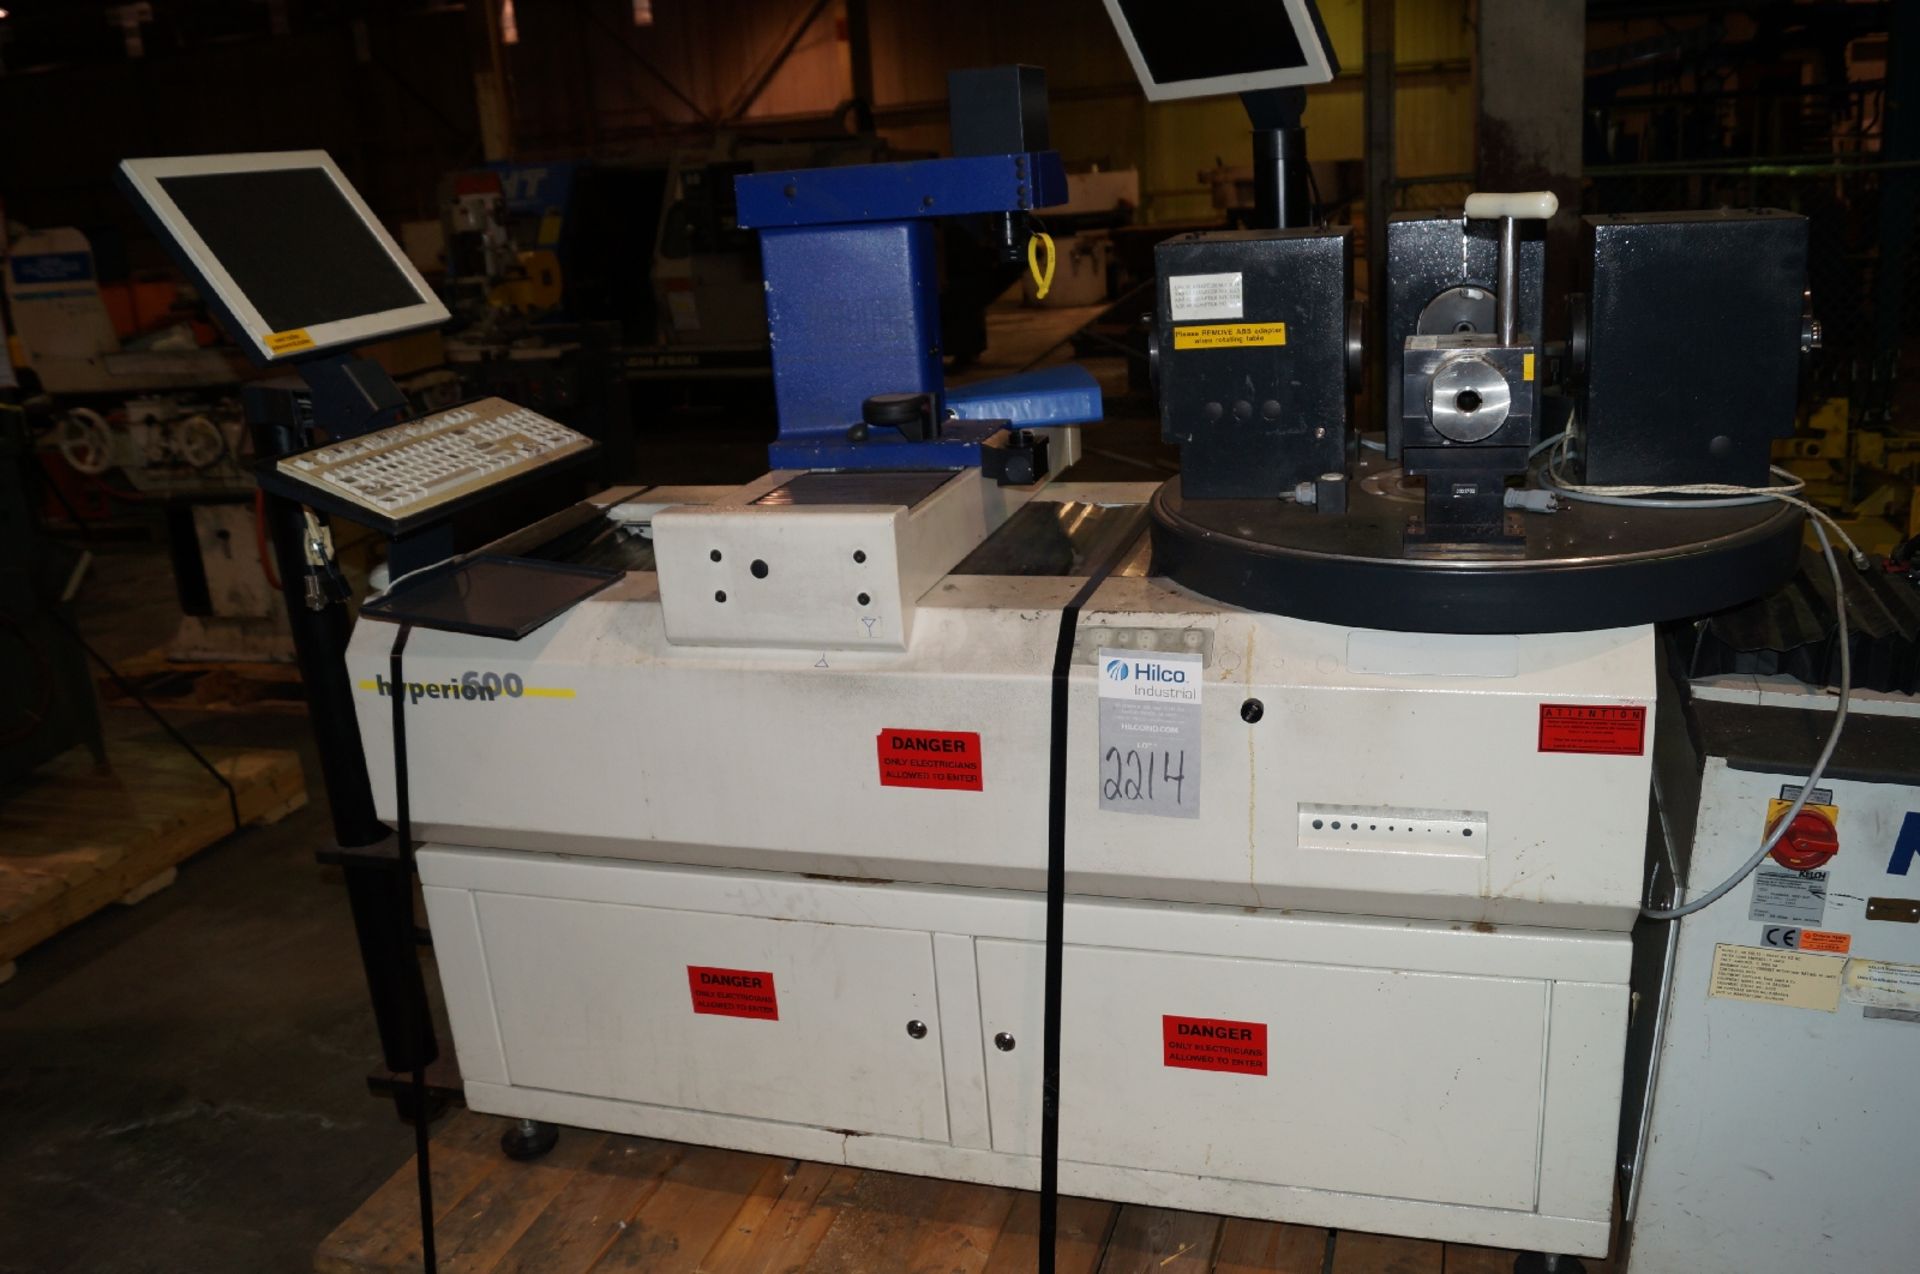 Kelch Model Hyperion 600 Three Turret Station Tool Presetter ; Zoller Monitor - Type TFT Display,